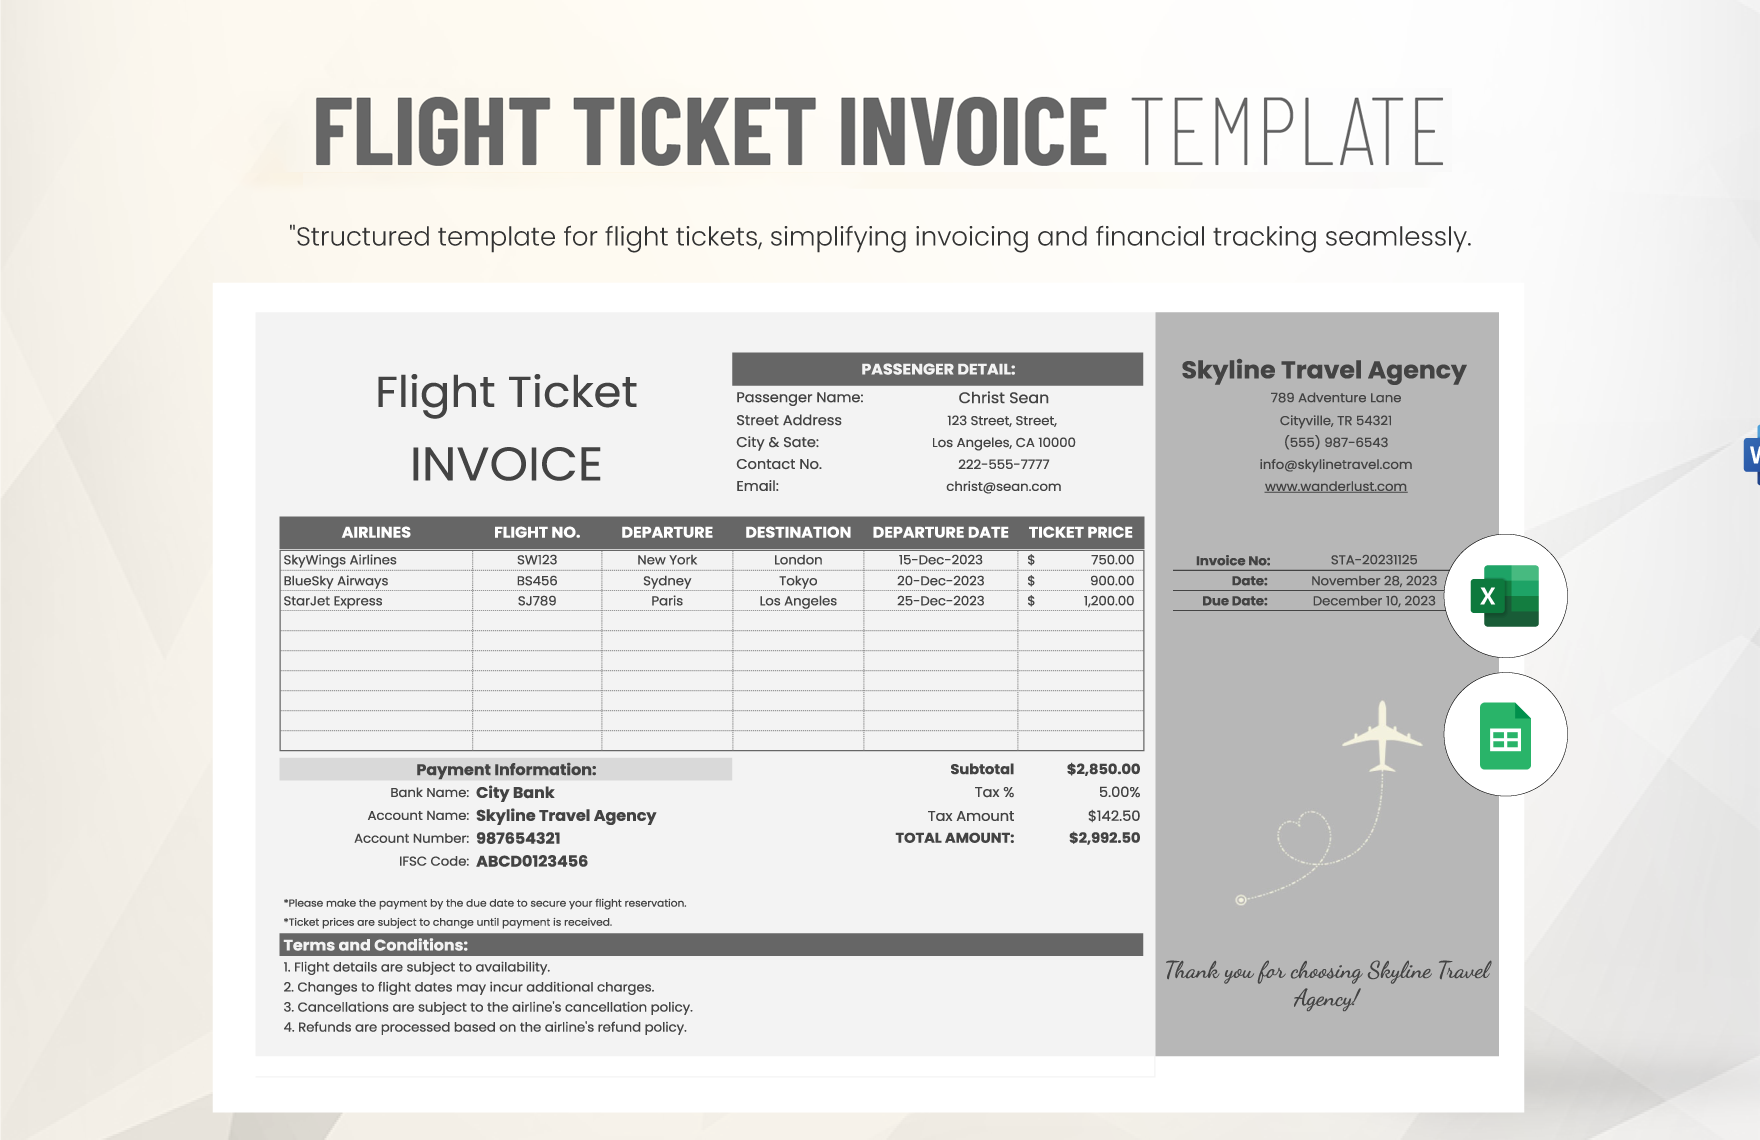 Flight Ticket Invoice Template in Excel, Google Sheets